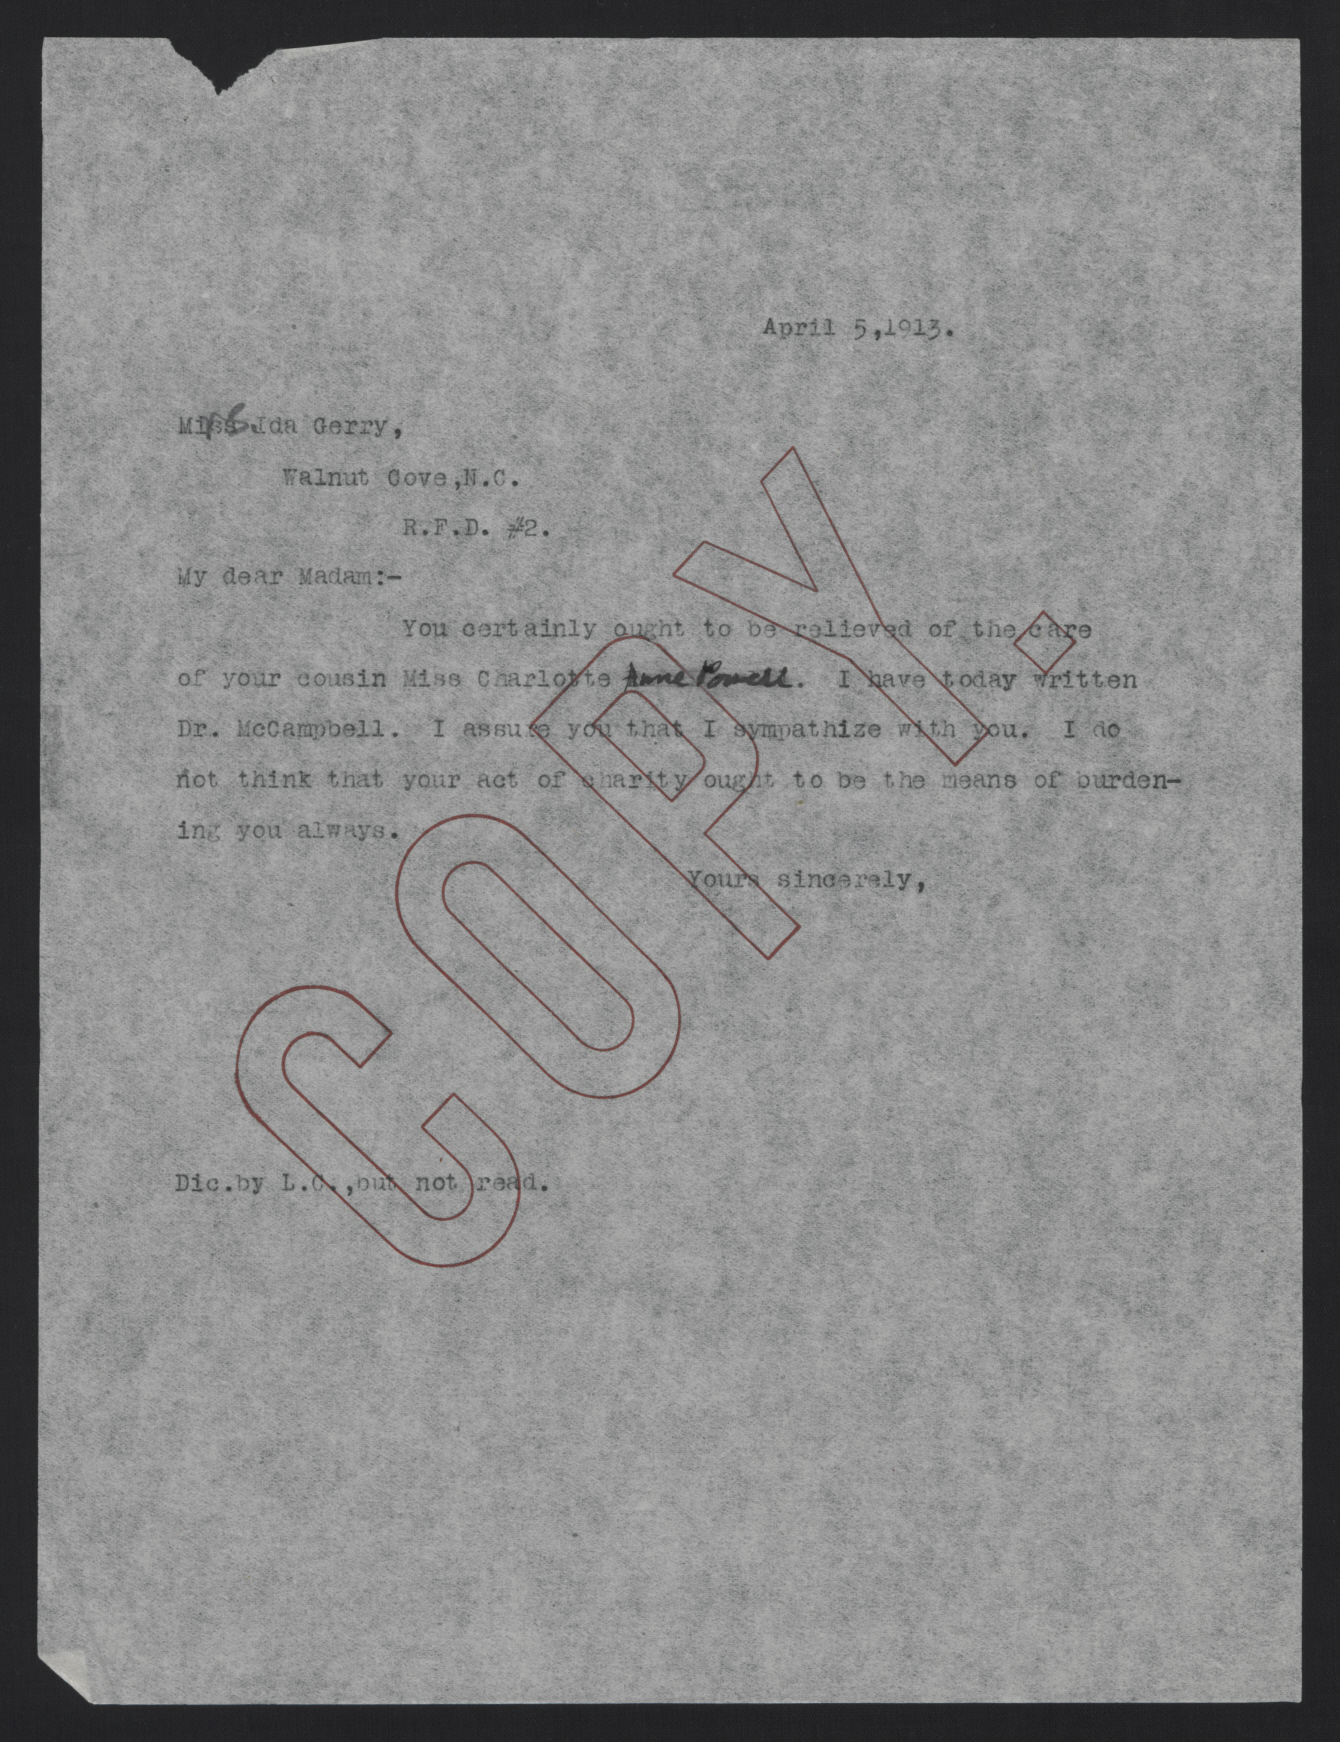 Letter from Craig to Gerrey, April 5, 1913